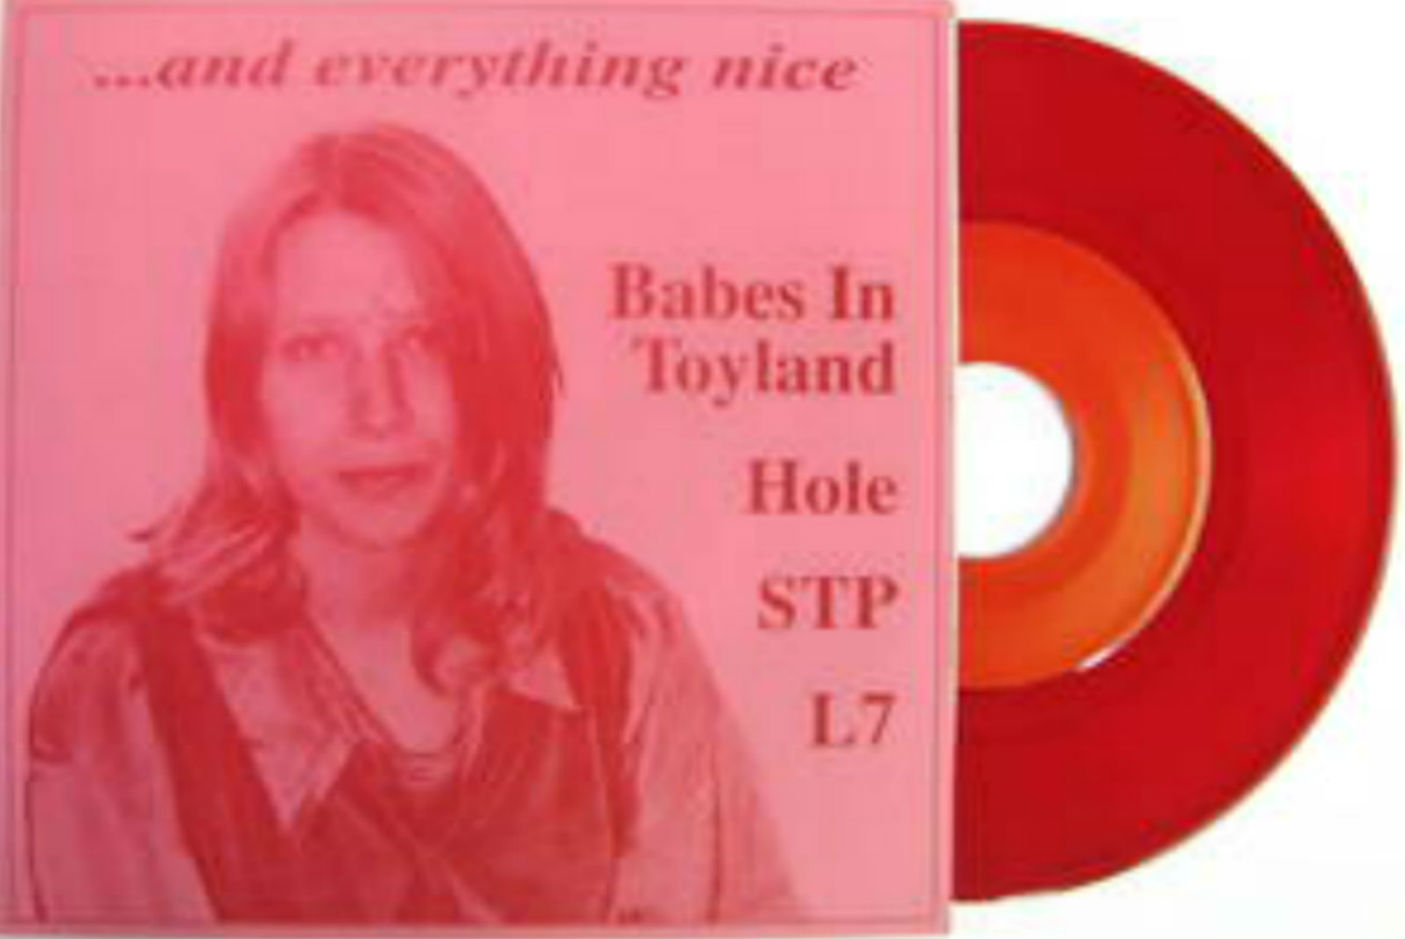 Babes In Toyland/Hole/STP/L7 / …And Everything Nice